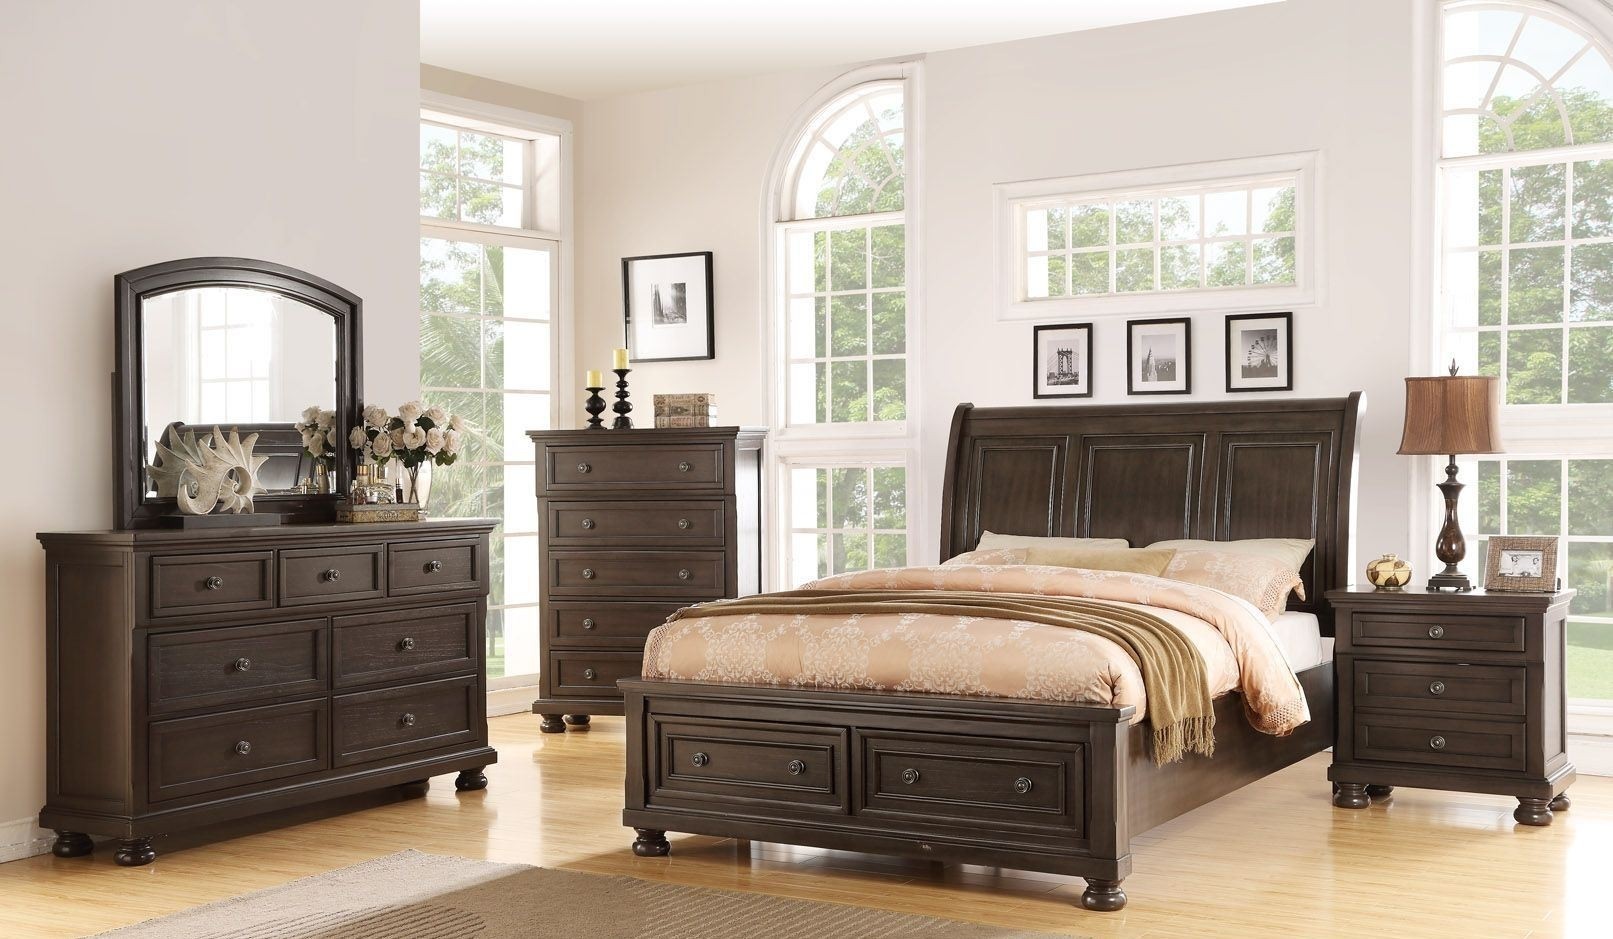 Soriah distressed gray sleigh storage bedroom set from